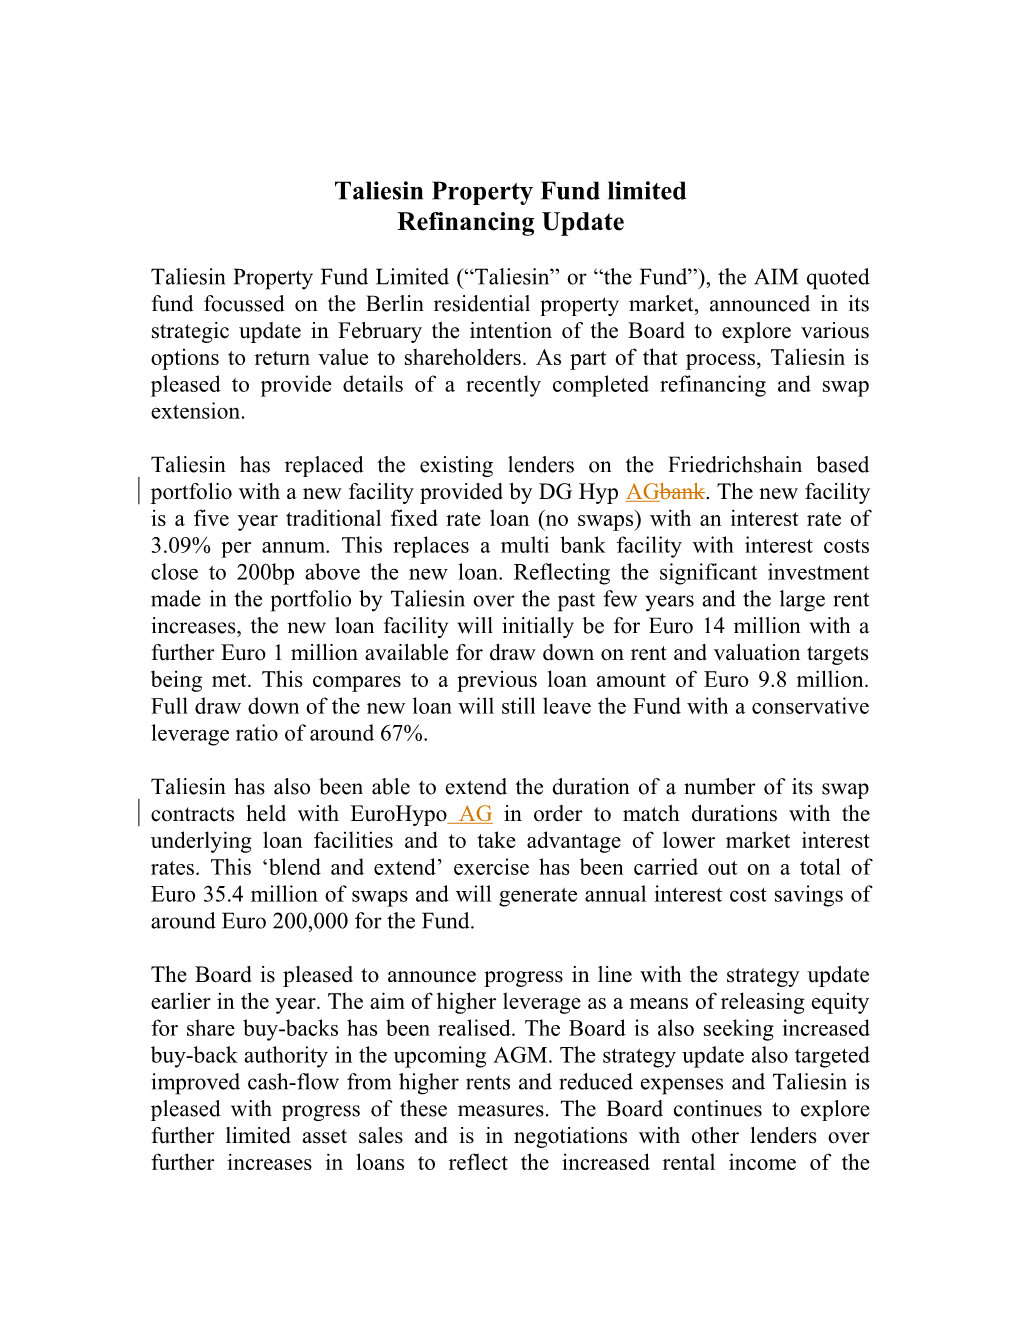 Taliesin Property Fund Limited